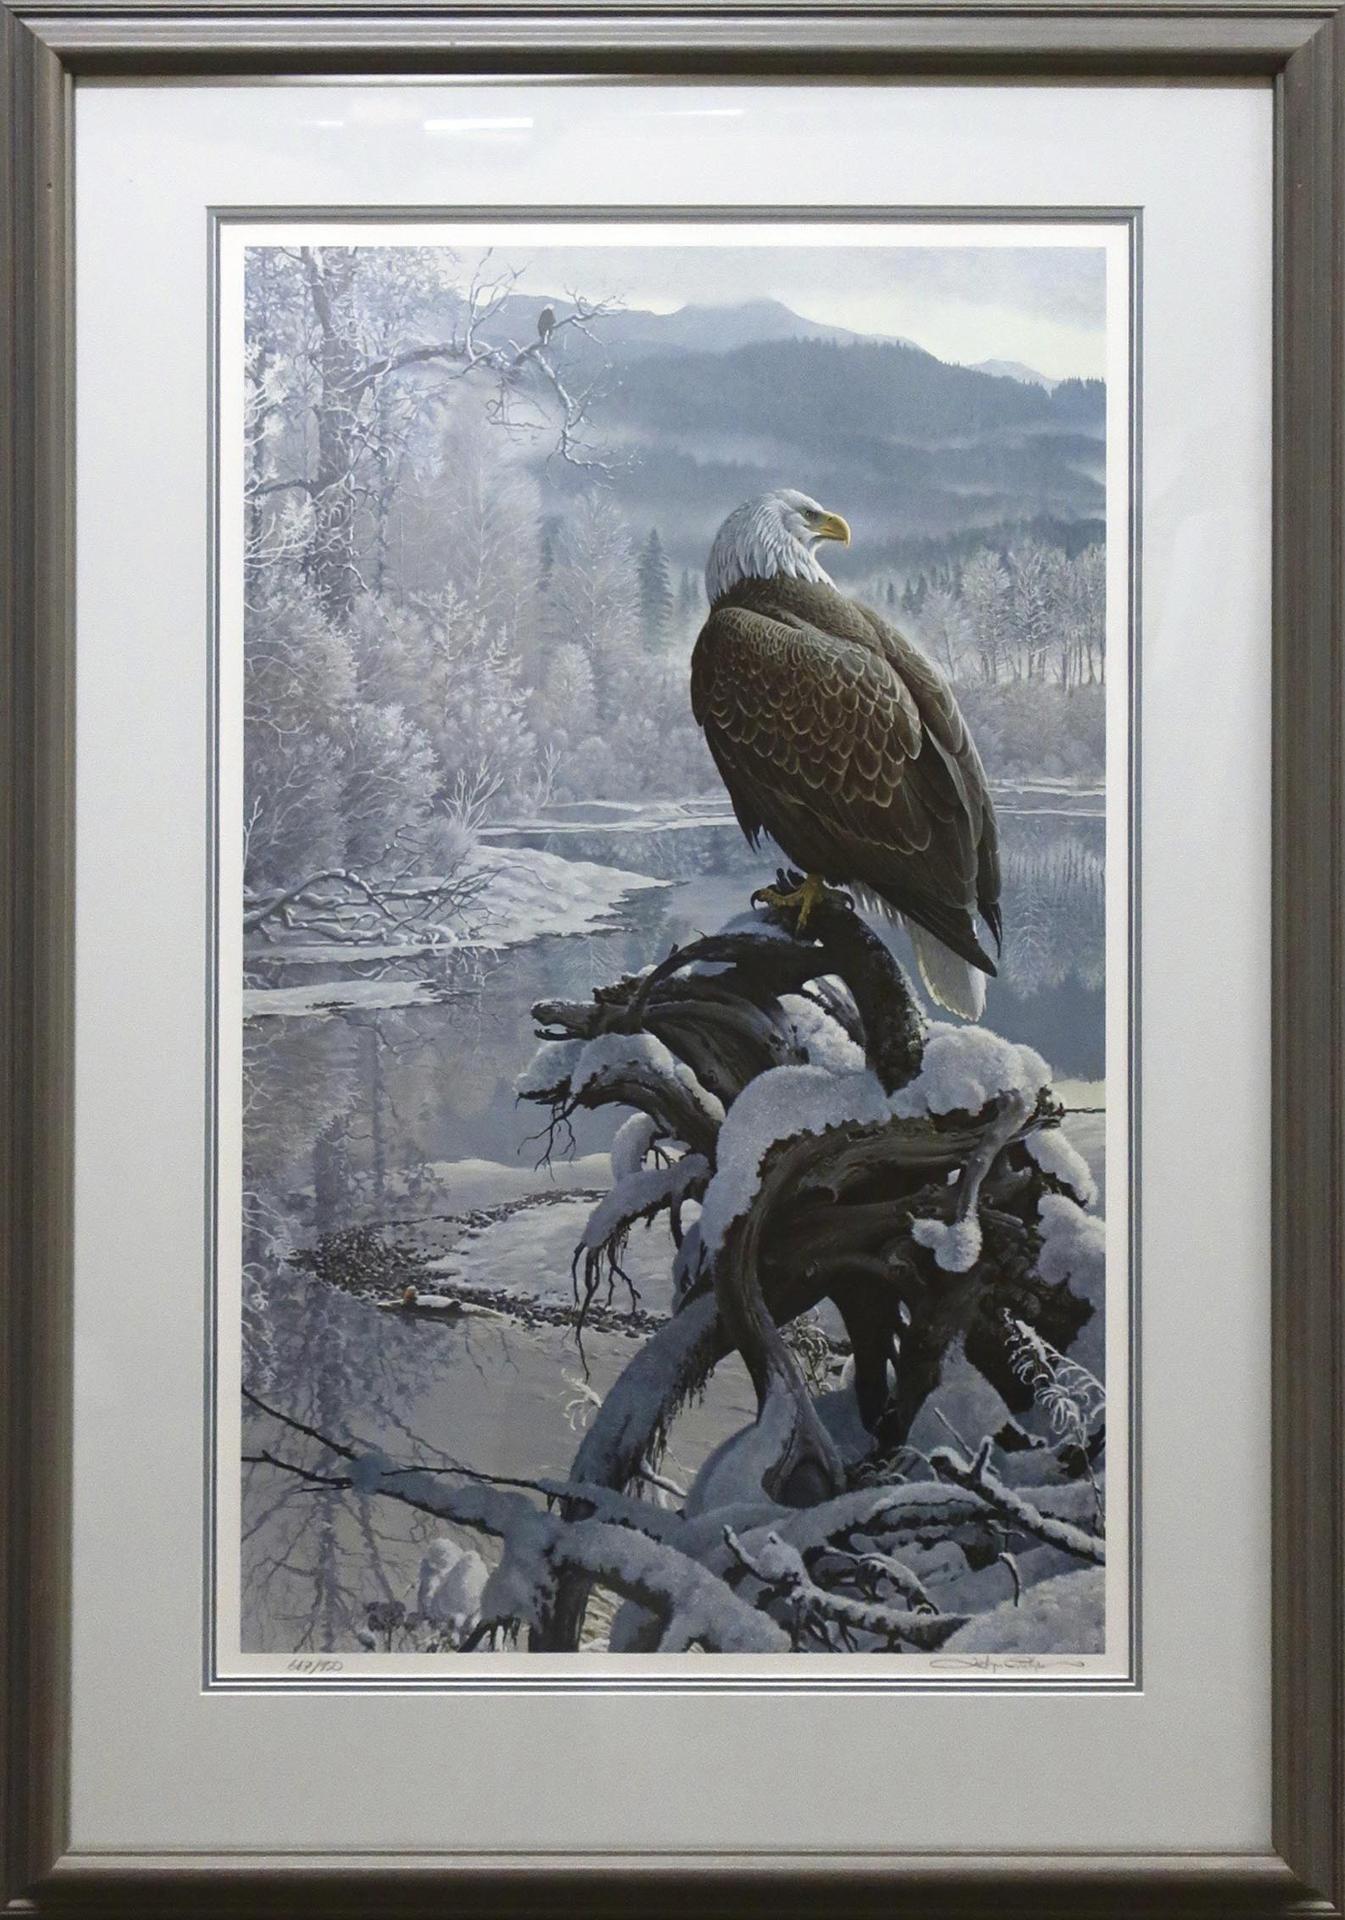 John Charles Picher (1949) - Winter On The River - Bald Eagle